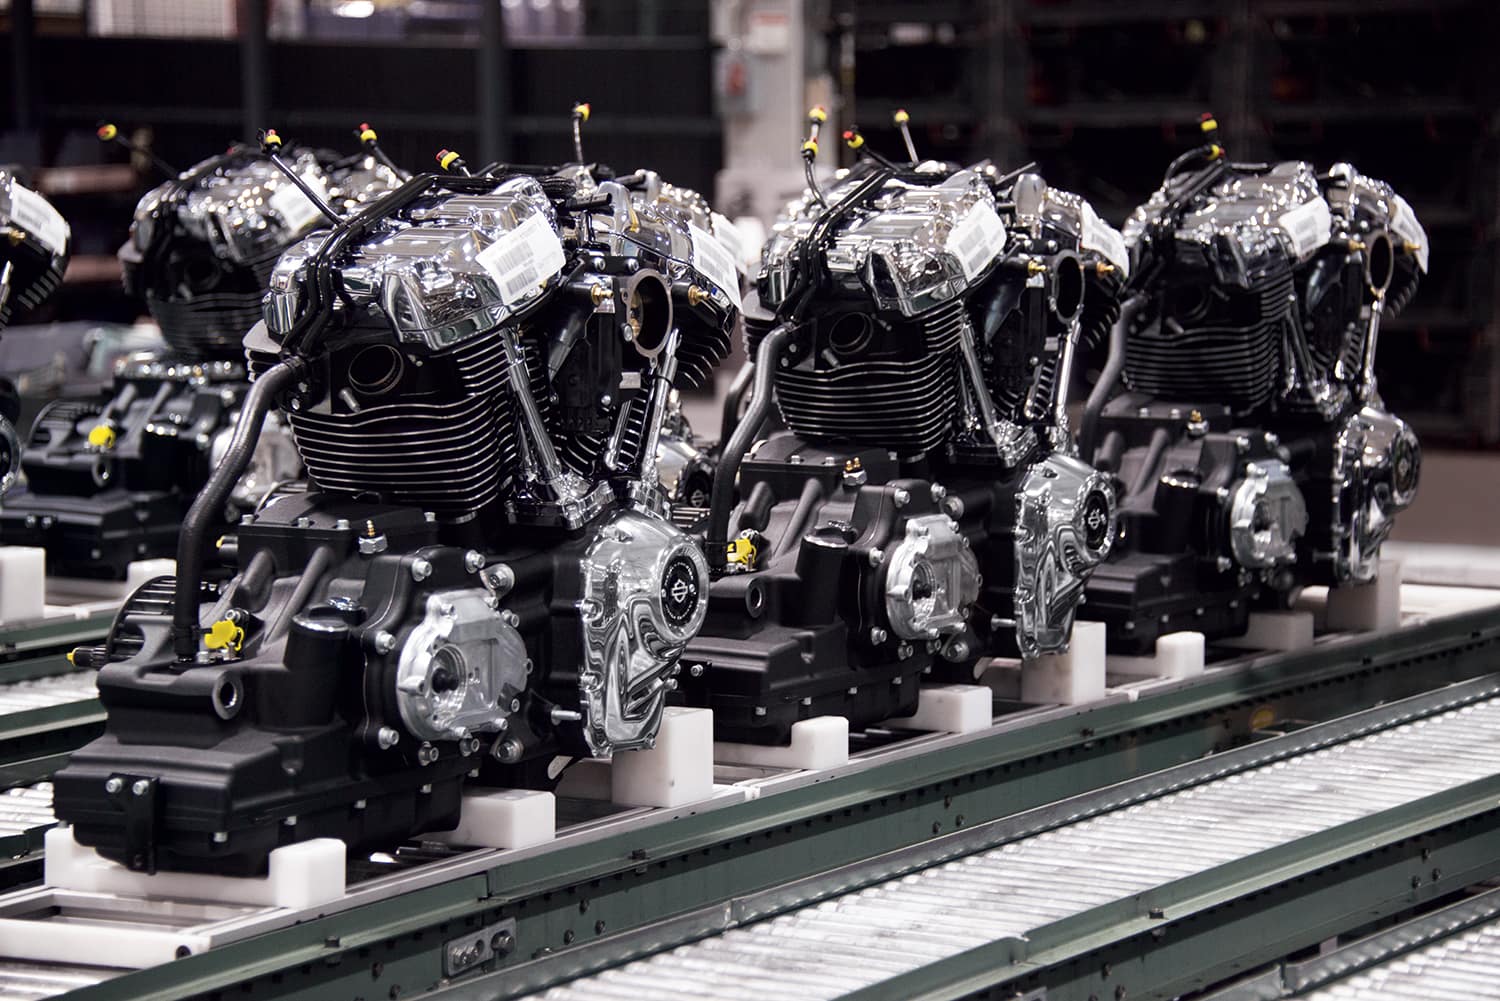 Check Out the Milwaukee-Eight Big Twin Engine from Our Harley-Davidson Dealer